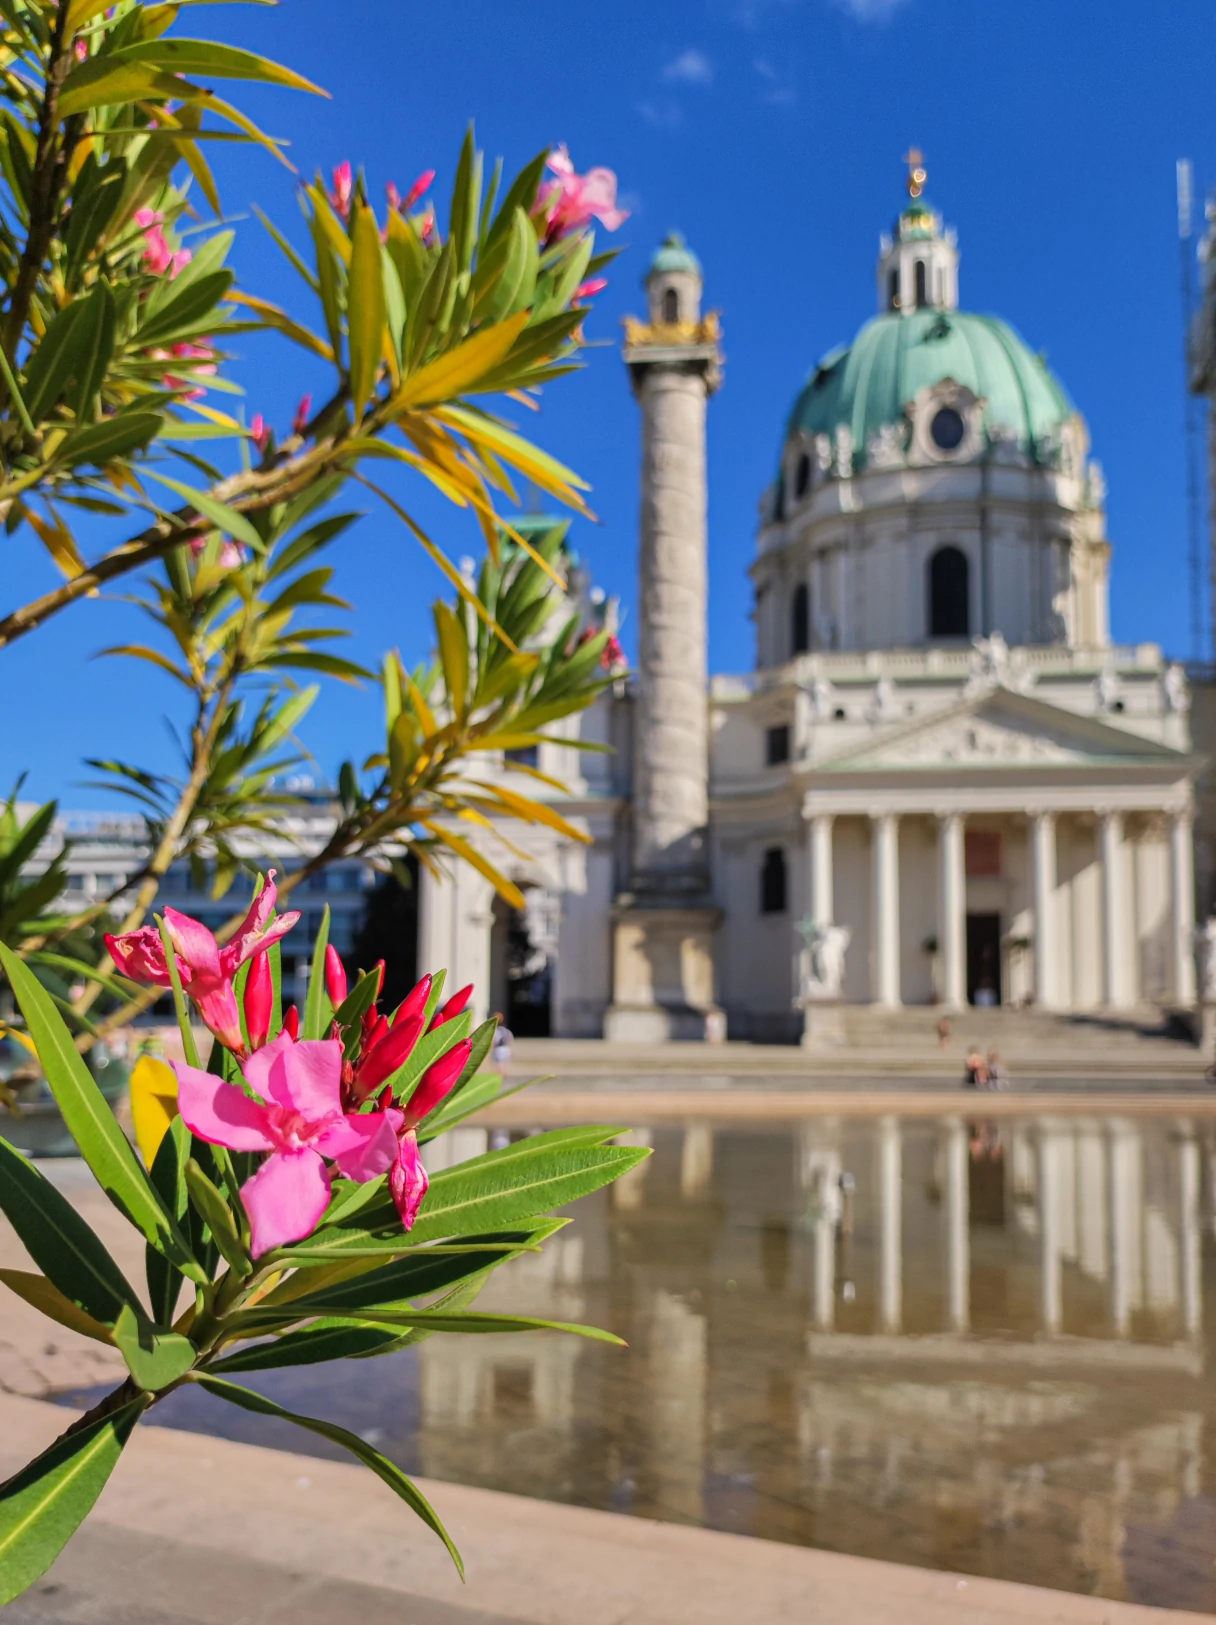 Karlskirche, Vienna, oleander in pink in the foreground, church in the background, blue sky, sunny day